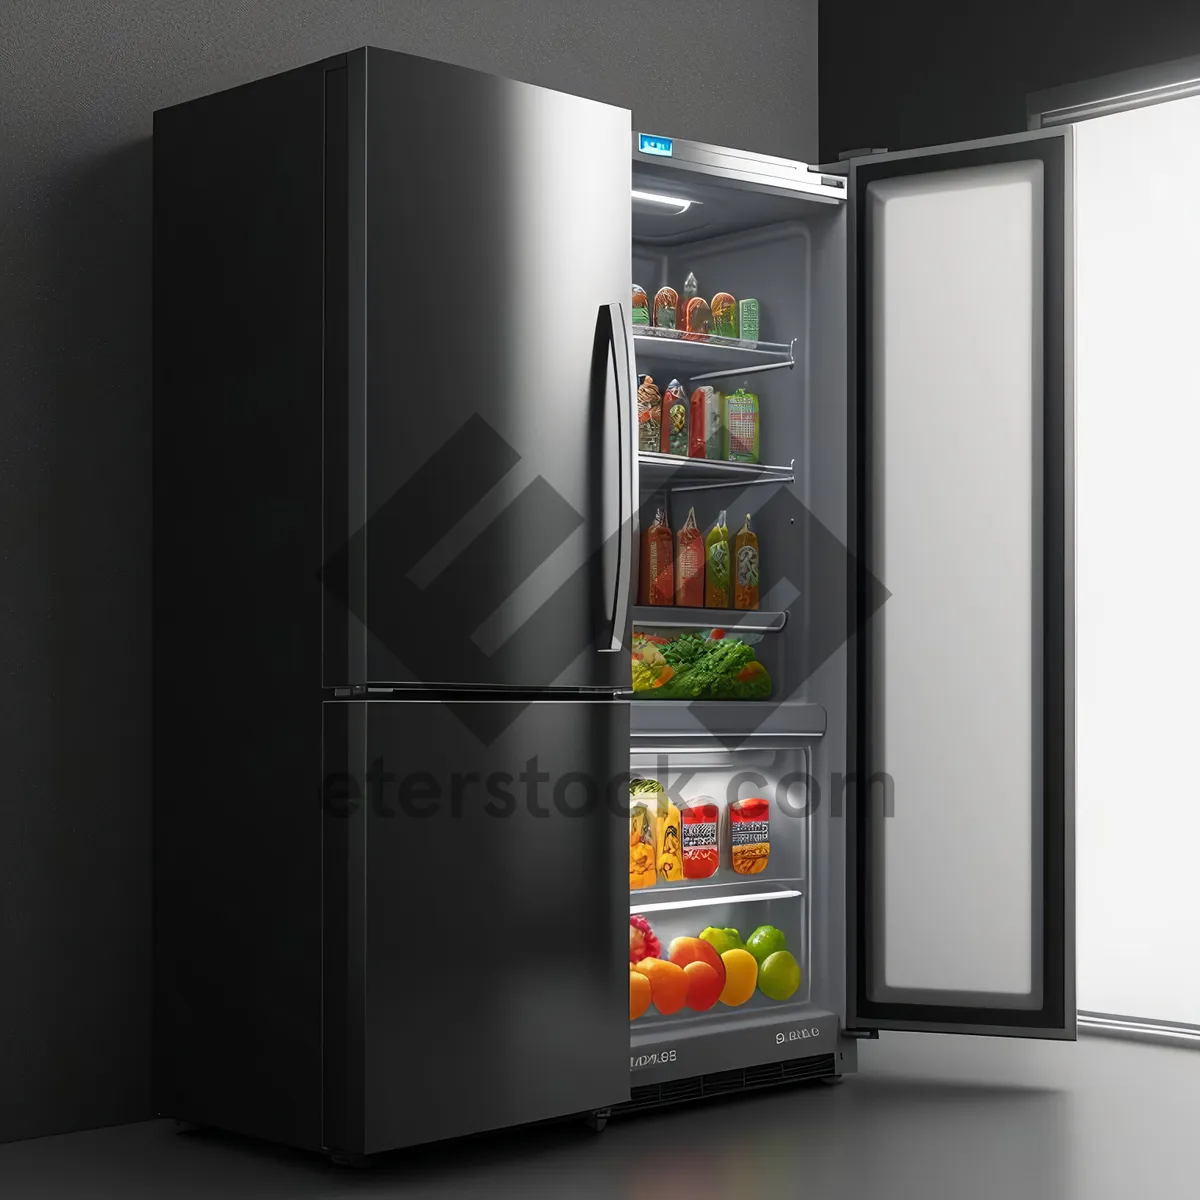 Picture of Modern white refrigerator for stylish home